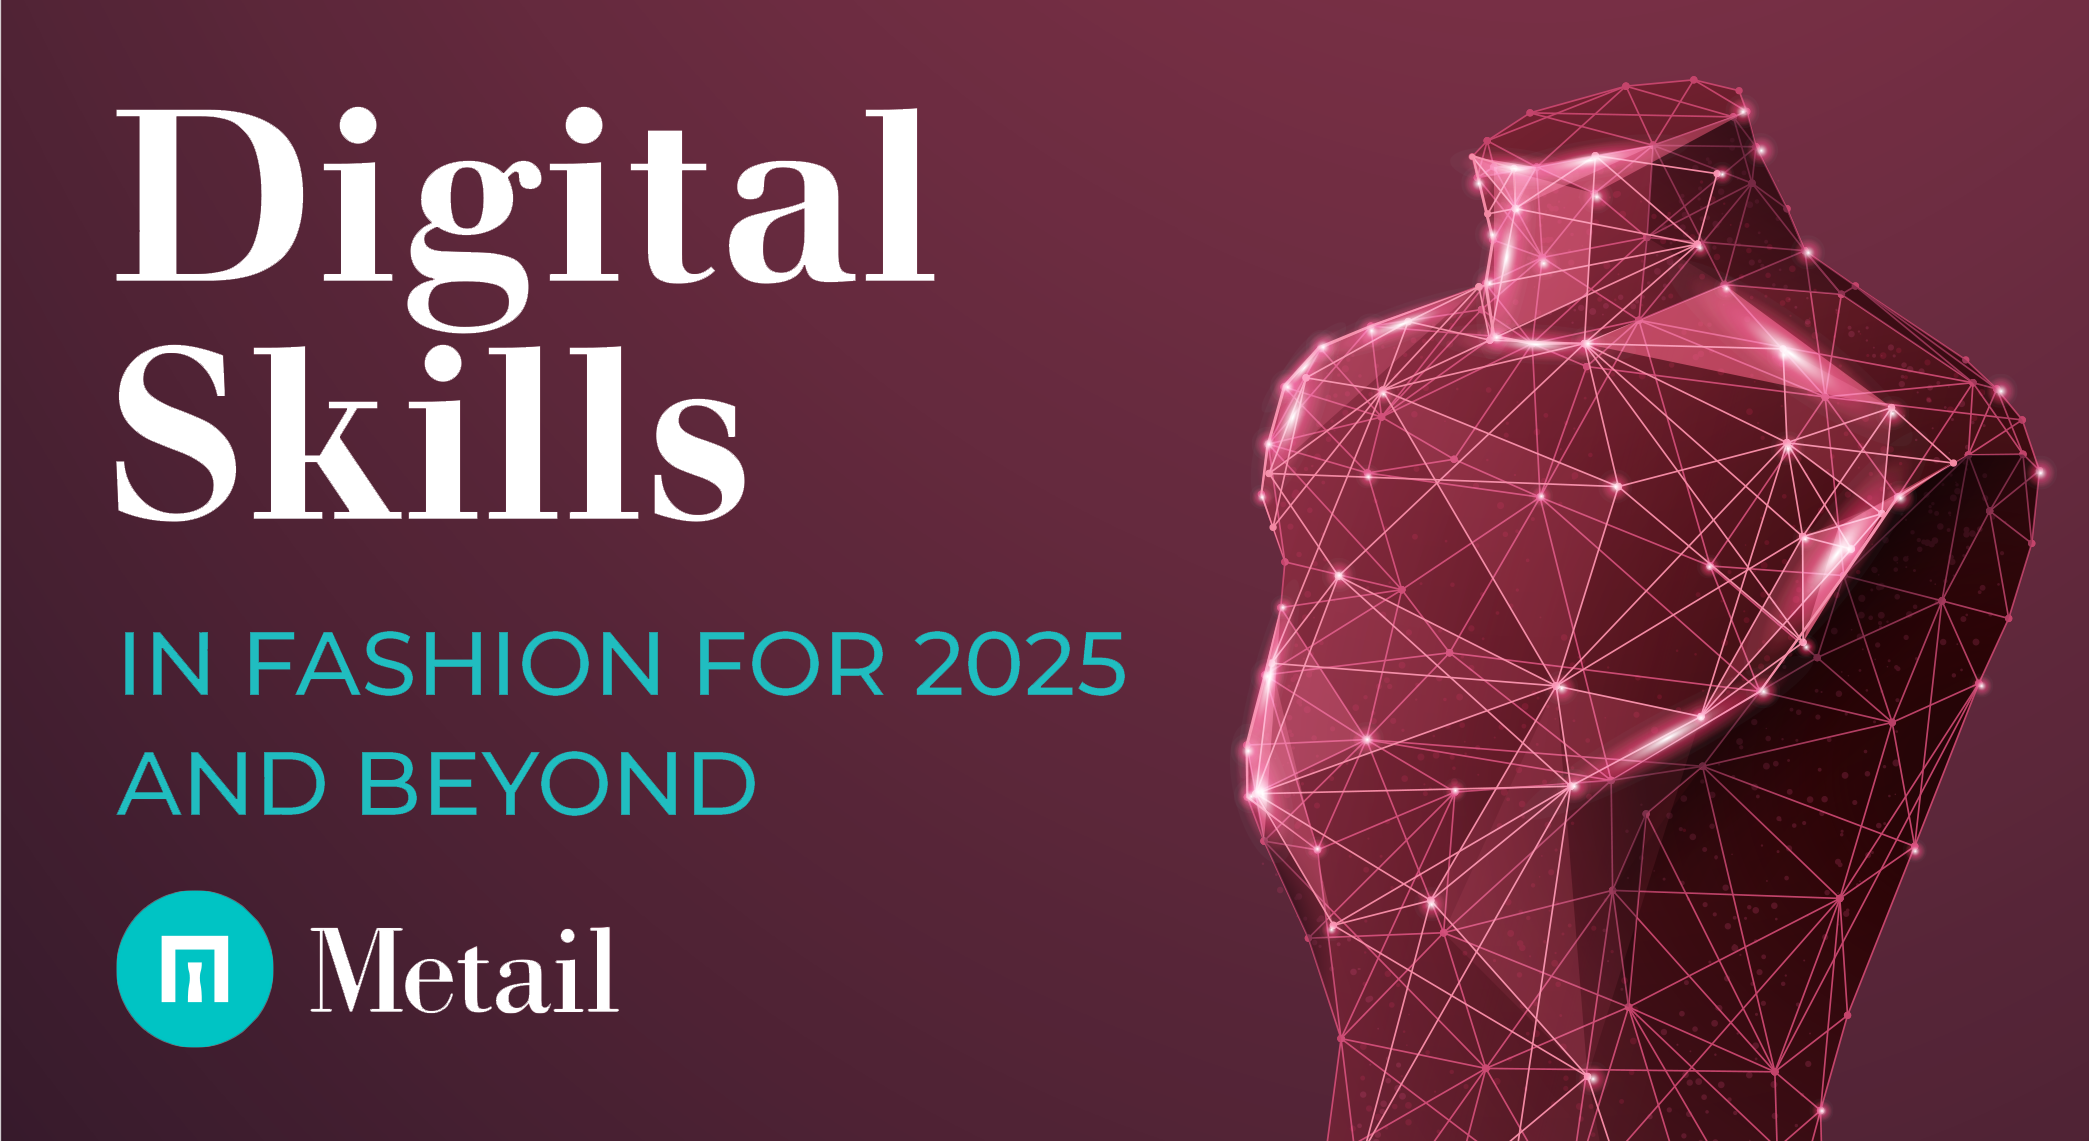 Digital Skills in Fashion for 2025 and Beyond